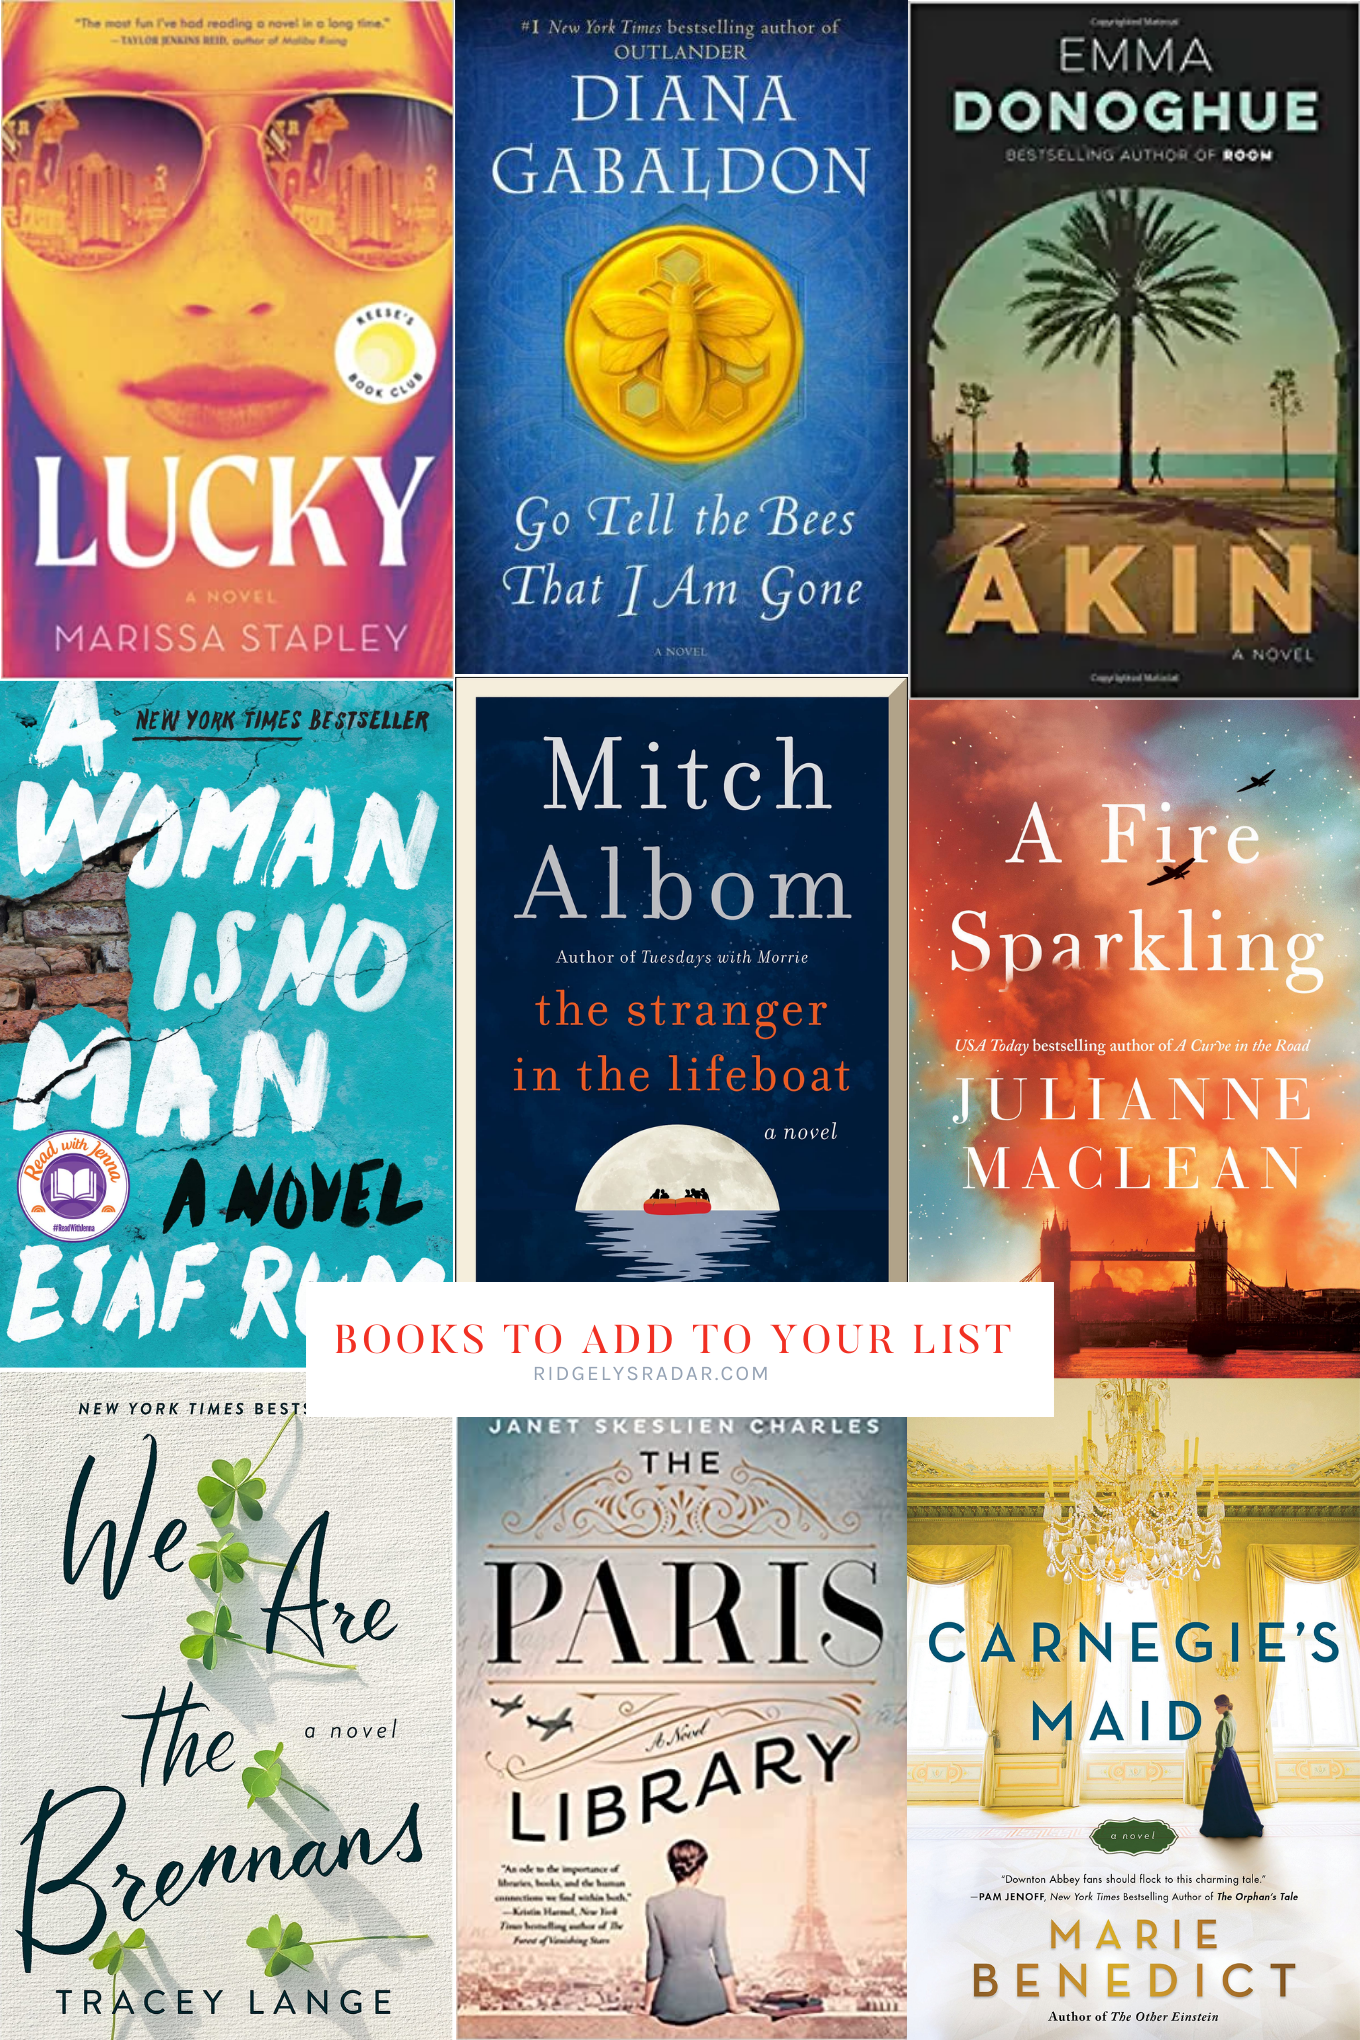 Here are some good books to read now. I did a big search and added new titles to my Goodreads so I always have a list to pick from.